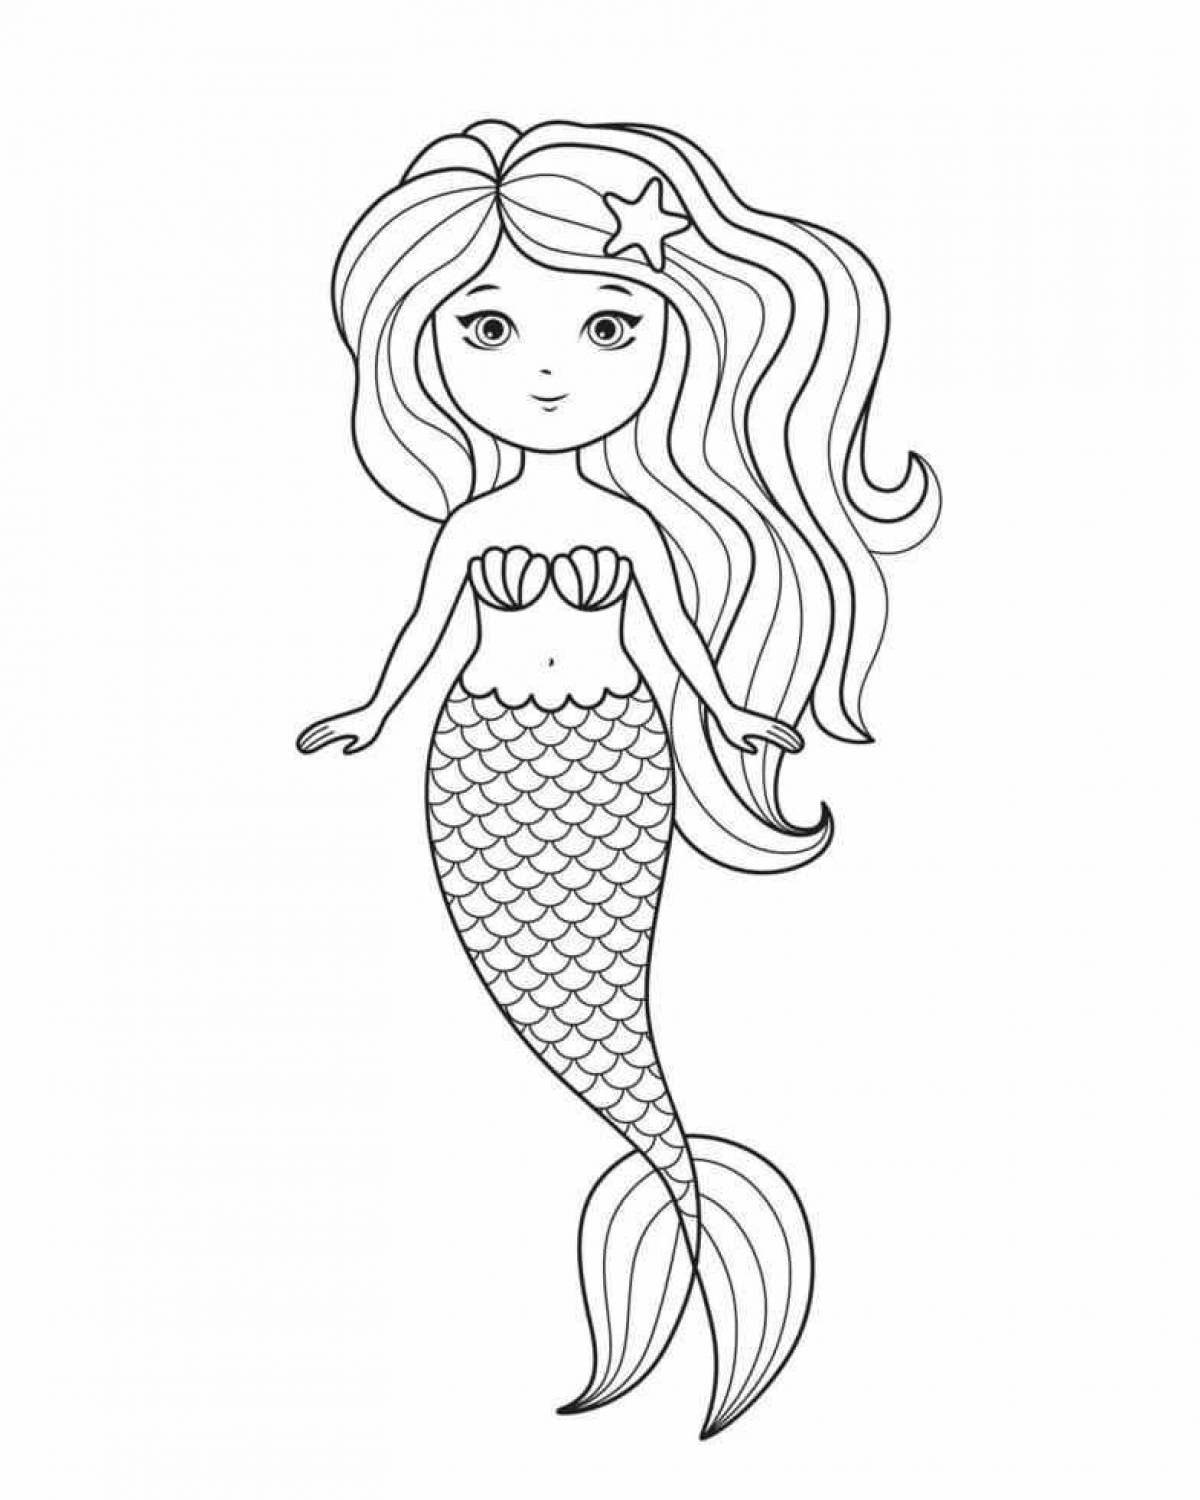 Cute little mermaid coloring book for 3-4 year olds